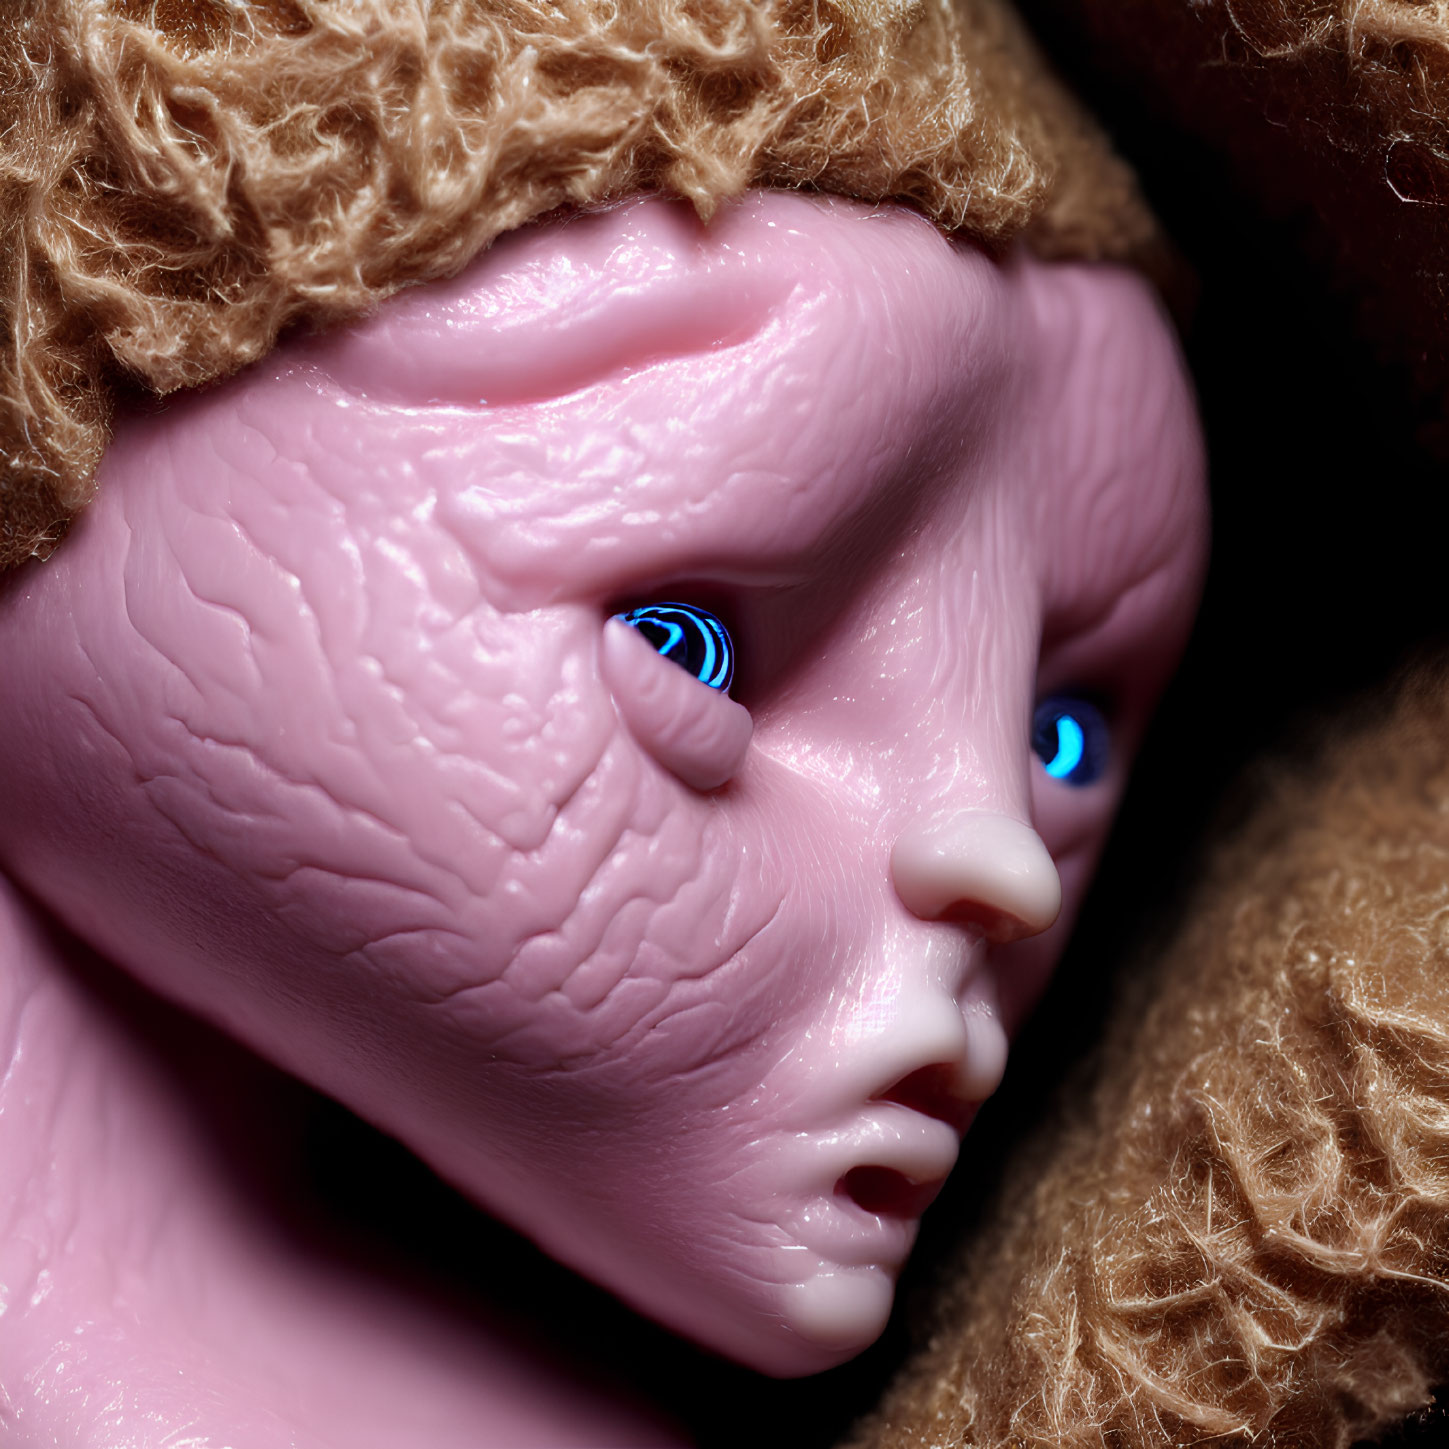 Detailed Close-Up of Doll's Textured Skin and Blue Eyes on Brown Fabric